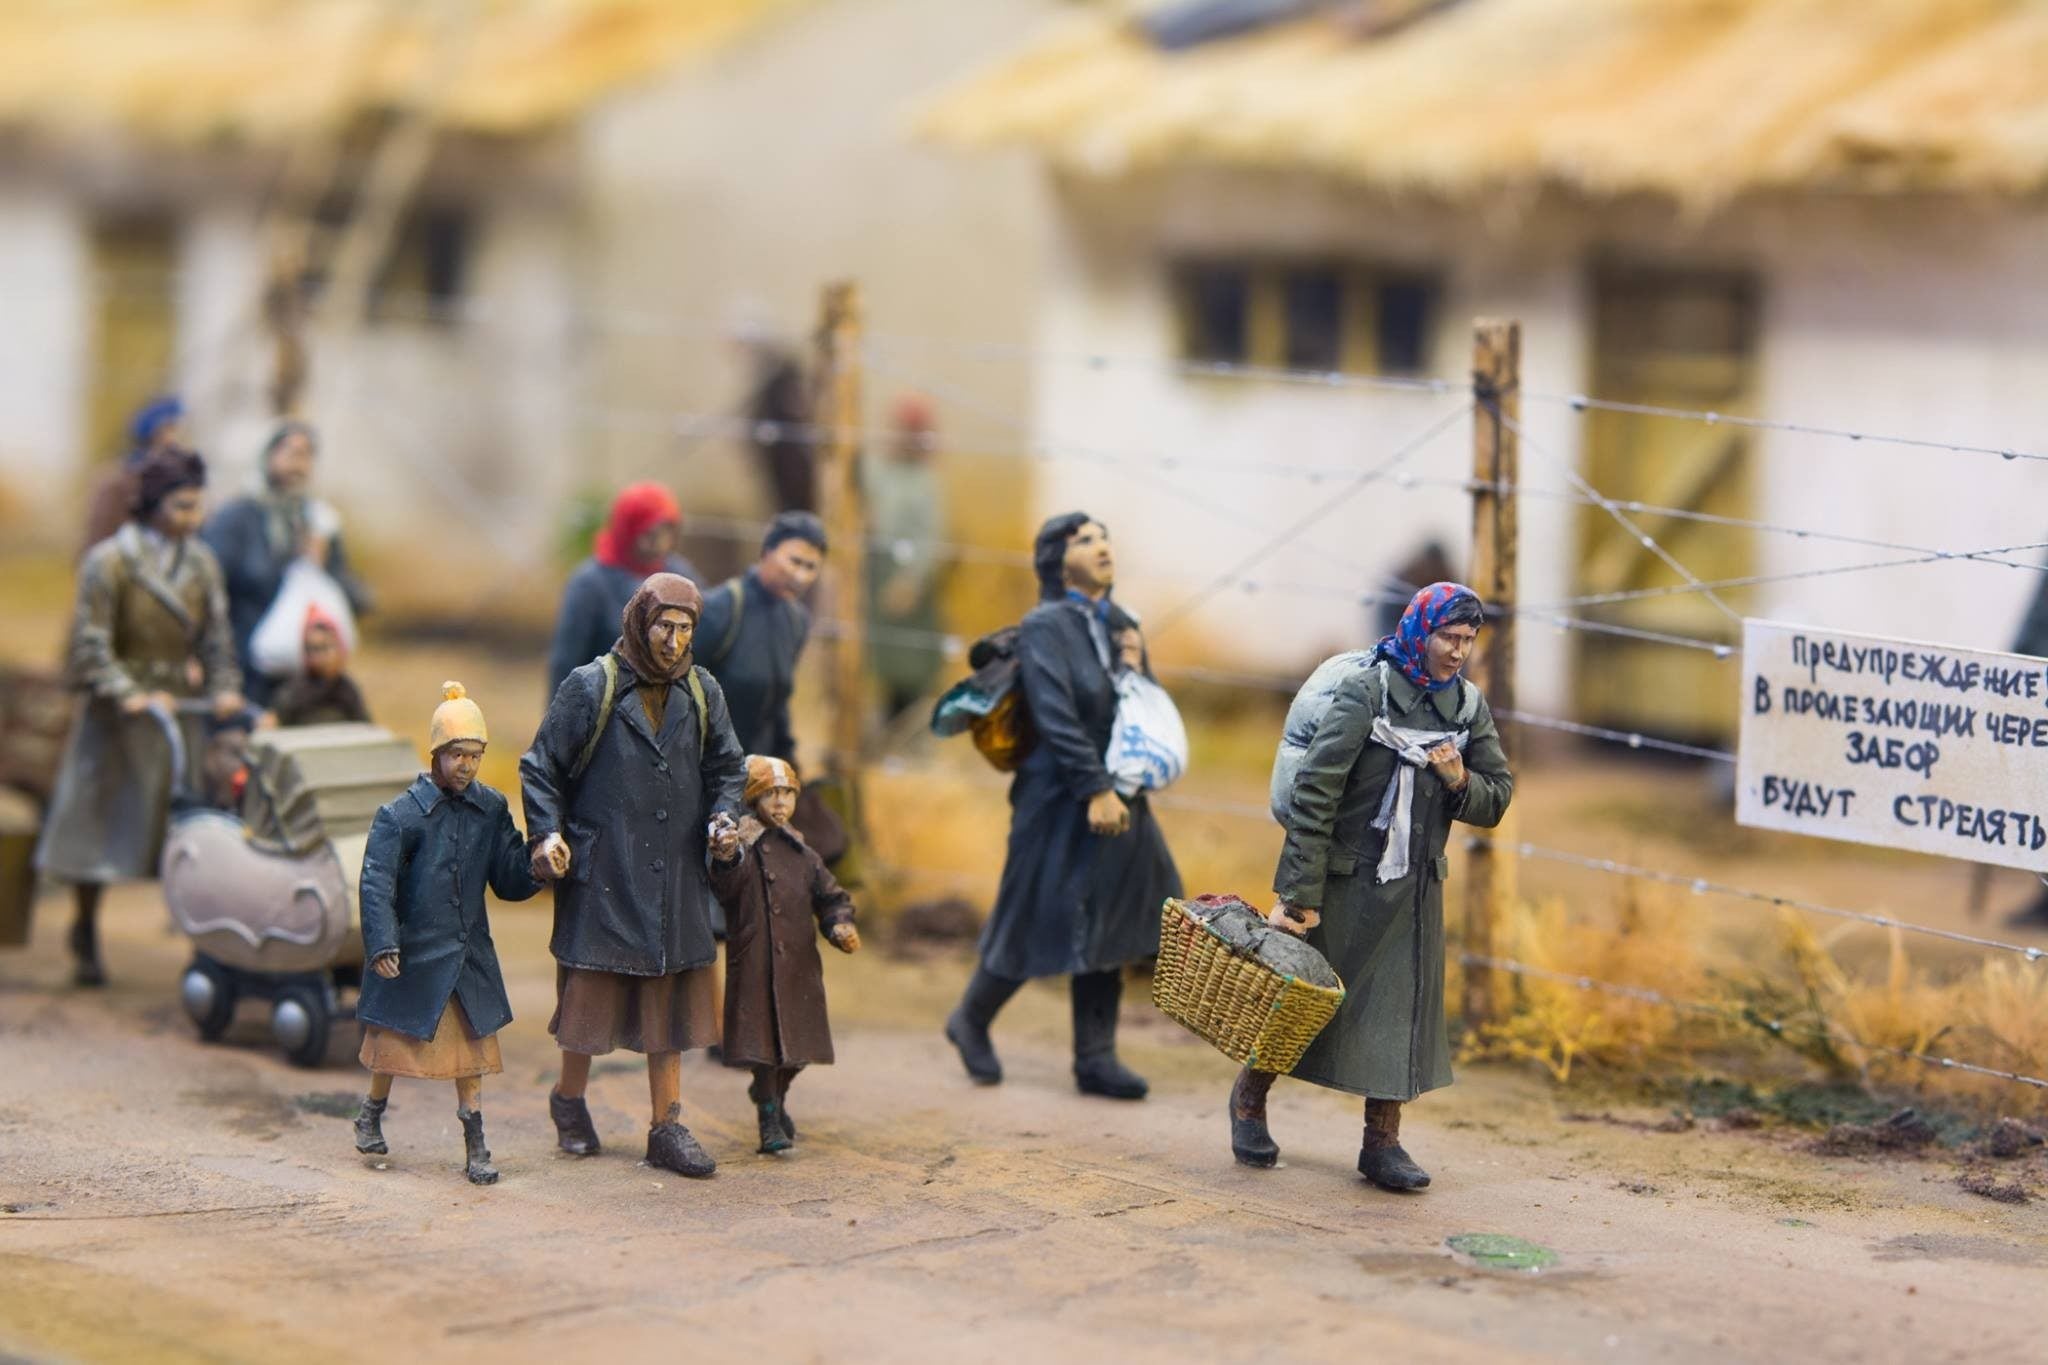 A mini-diorama titled, "Ghetto in Transnistria" depicting women and children tiredly walking through a ghetto. Created by Evgeny Kapuka from the Odessa Holocaust Museum collection. (Photo by Nikolai Gorshkov)